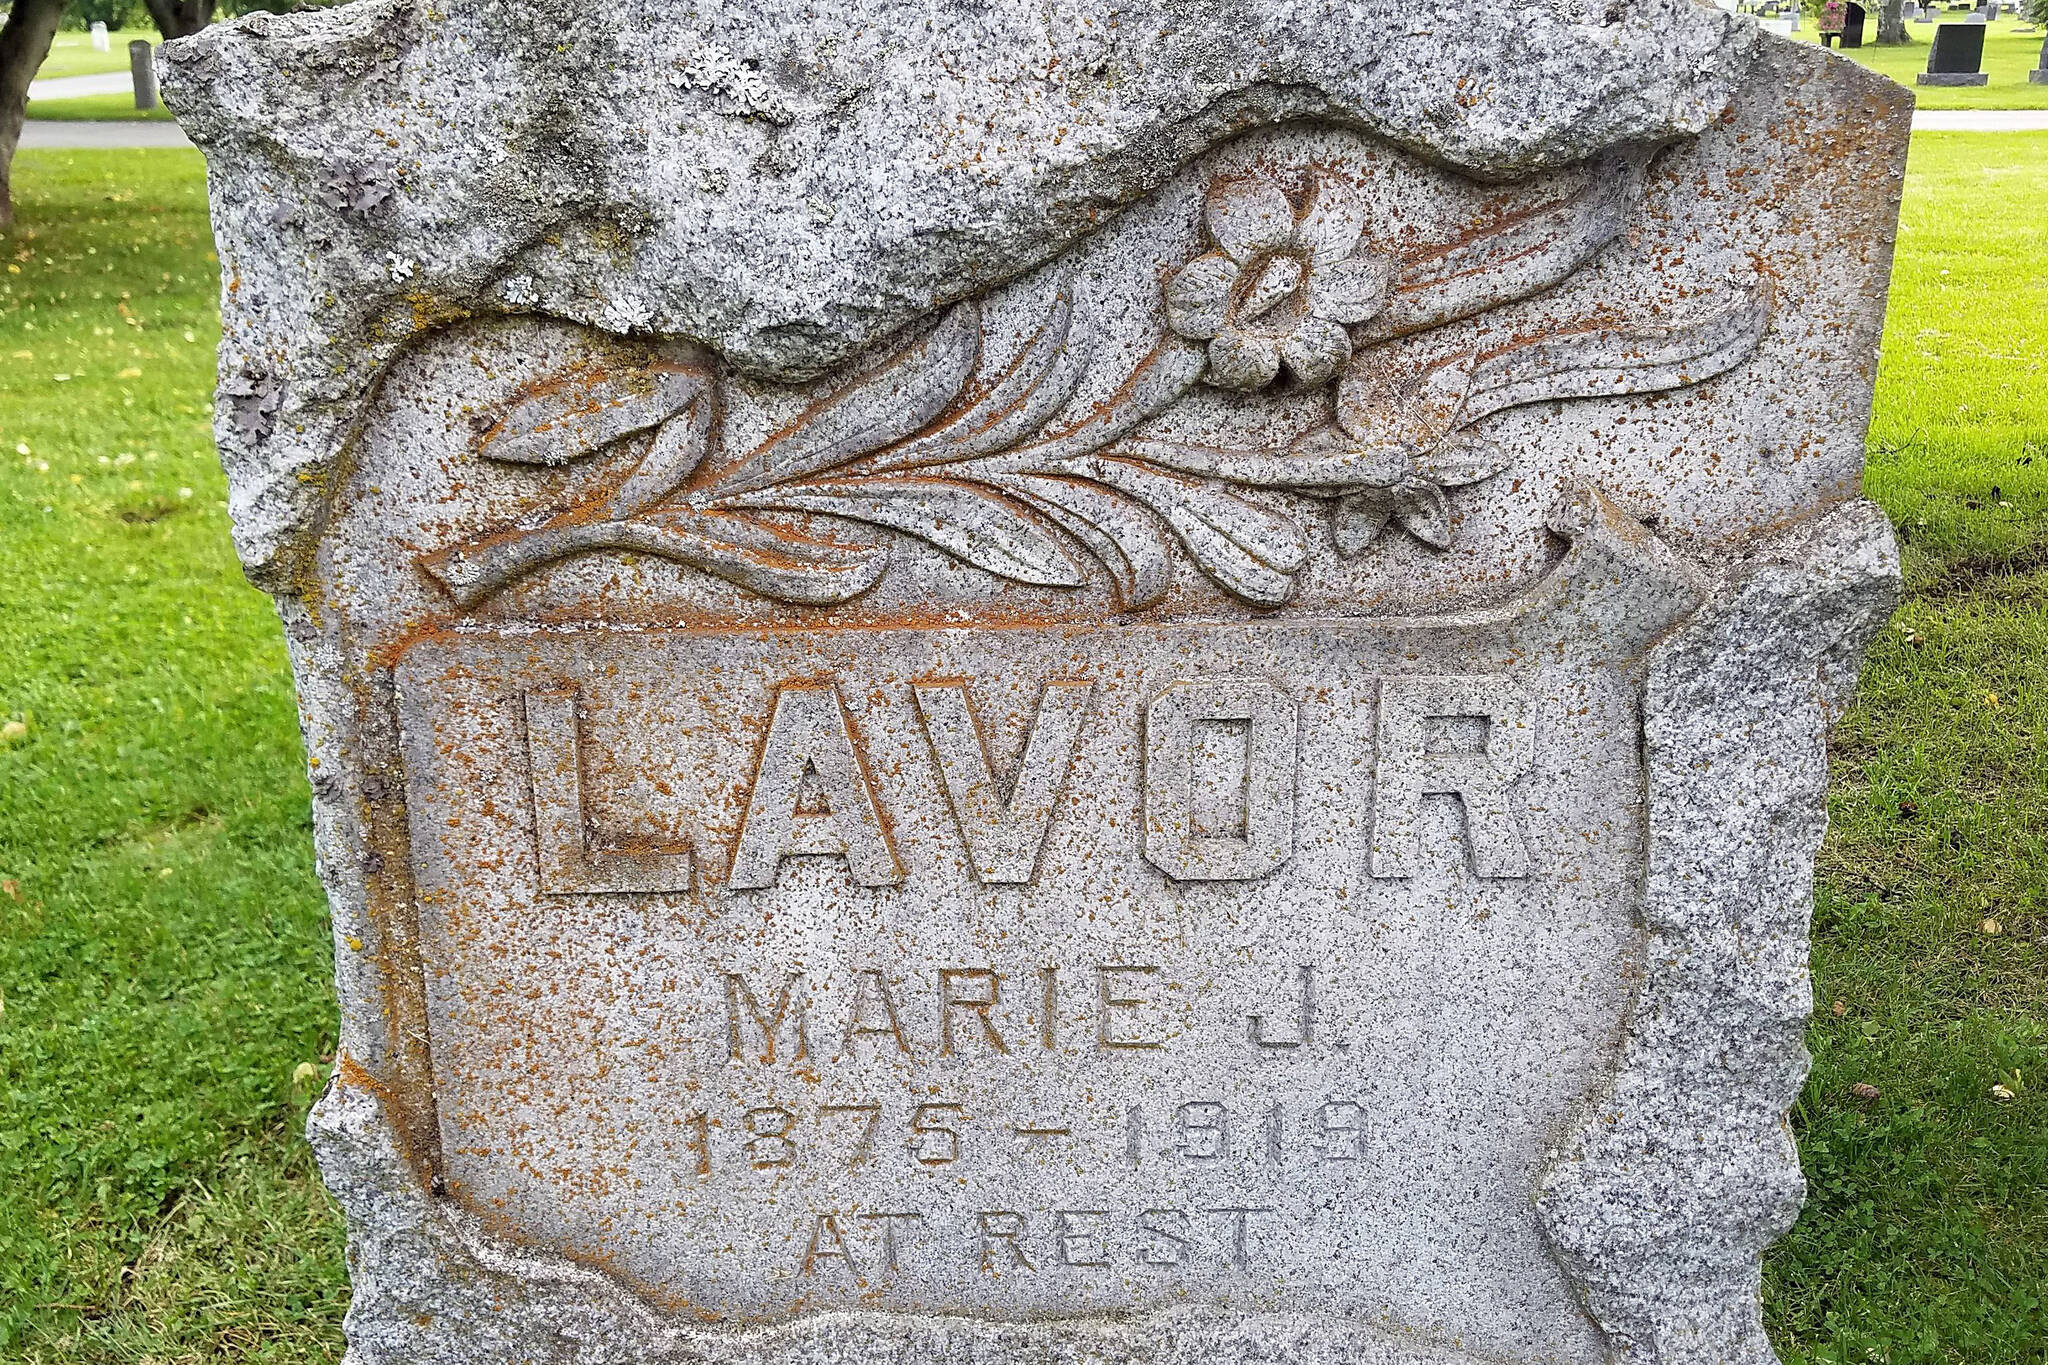 Marie (sometimes called Margaret) Lavor was buried in the Anchorage Memorial Park Cemetery in 1919 after she was murdered by William Dempsey. (Image provided by findagrave.com website)